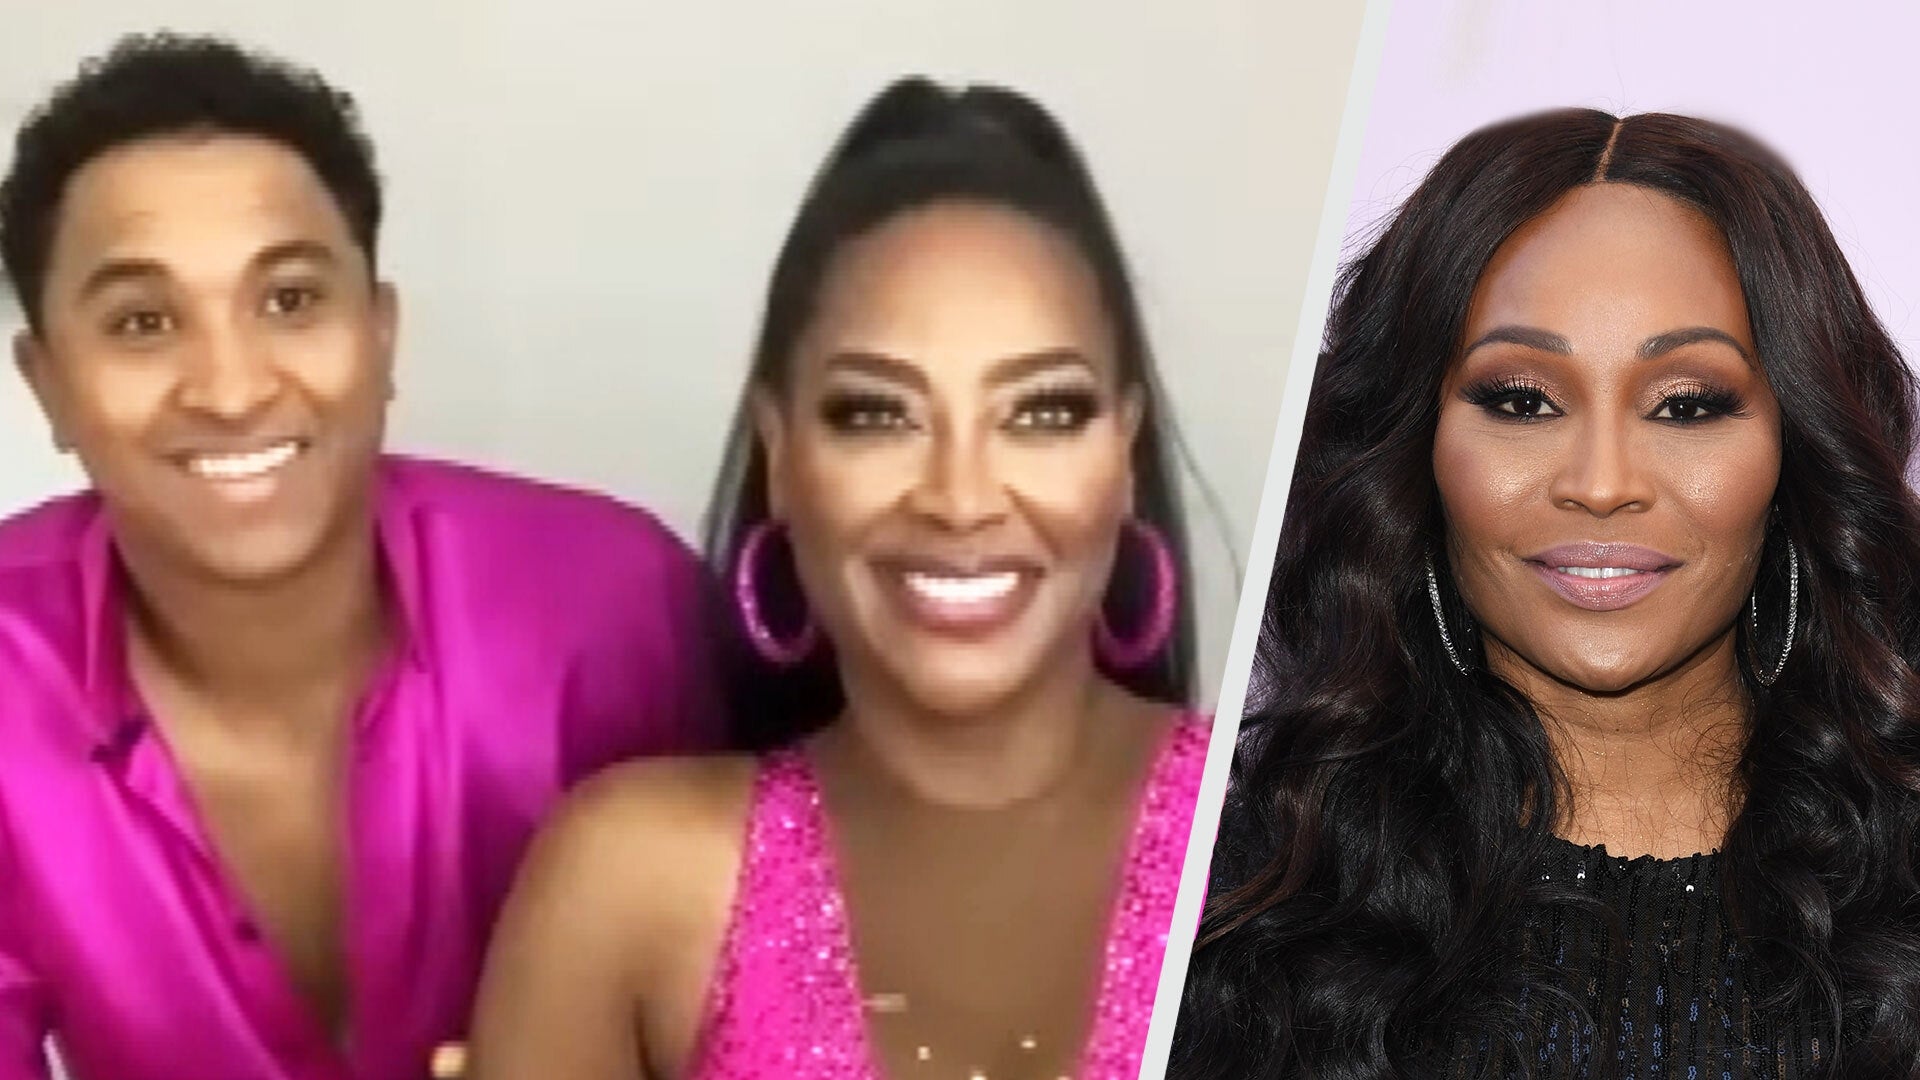 Dancing With the Stars Kenya Moore on Cynthia Bailey Leaving The Real Housewives of Atlanta photo